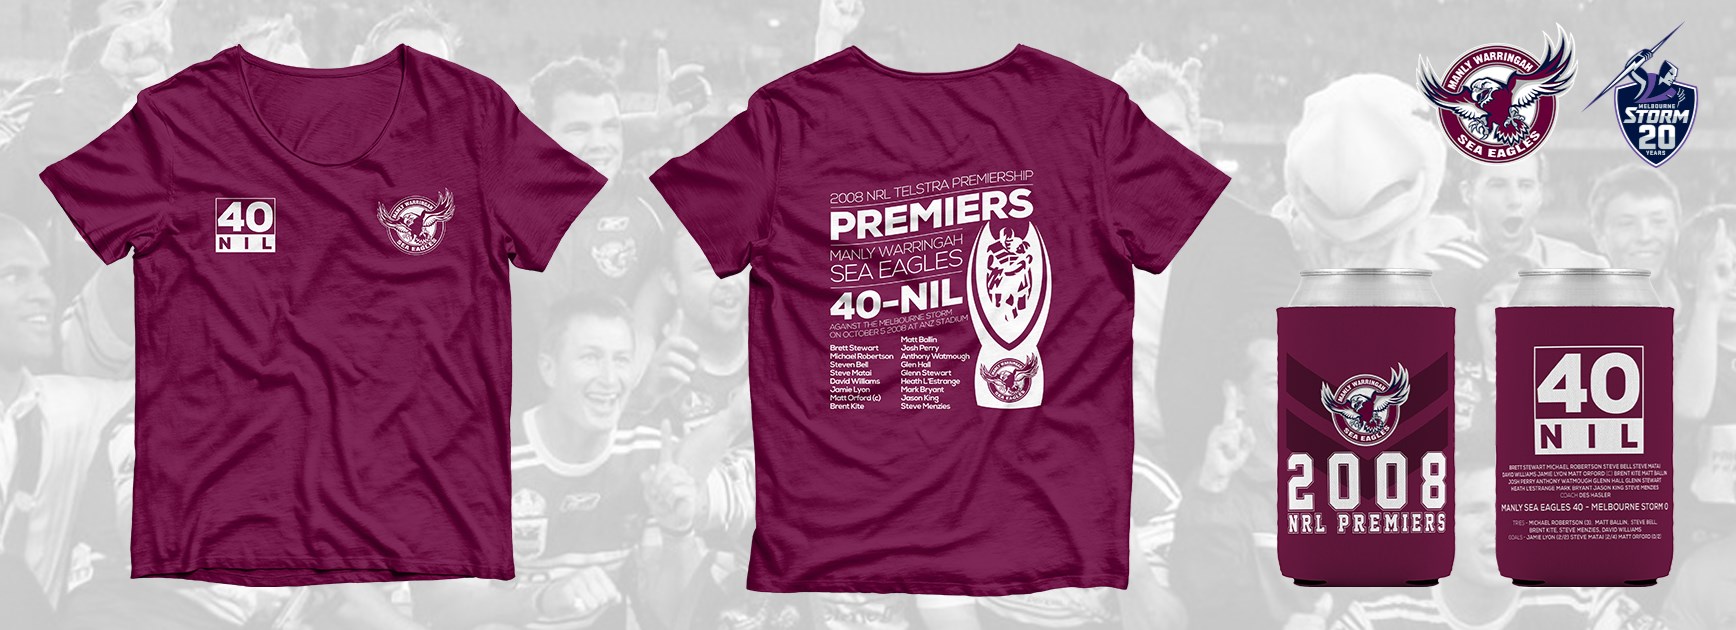 Come celebrate our 40-nil anniversary with us with a limited edition tee